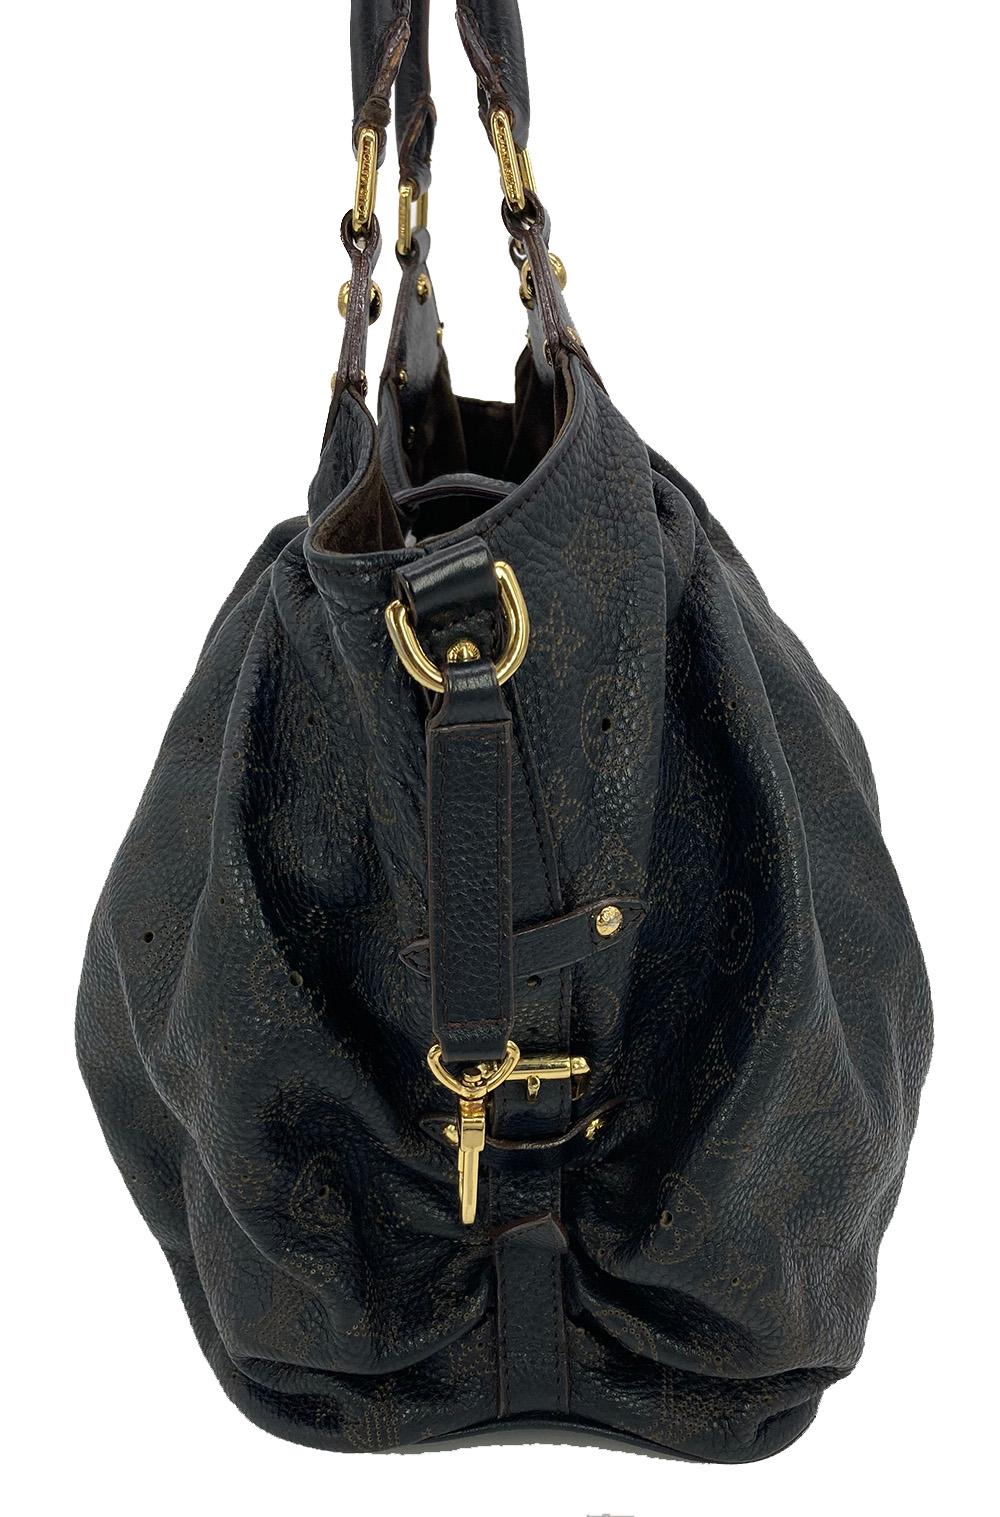 Louis Vuitton Black Mahina GM Shoulder Bag in very good condition. Pleated Black mahina leather exterior with perforated monogram design trimmed with gold hardware and double top handles. Top sliding latch strap closure opens to a brown suede